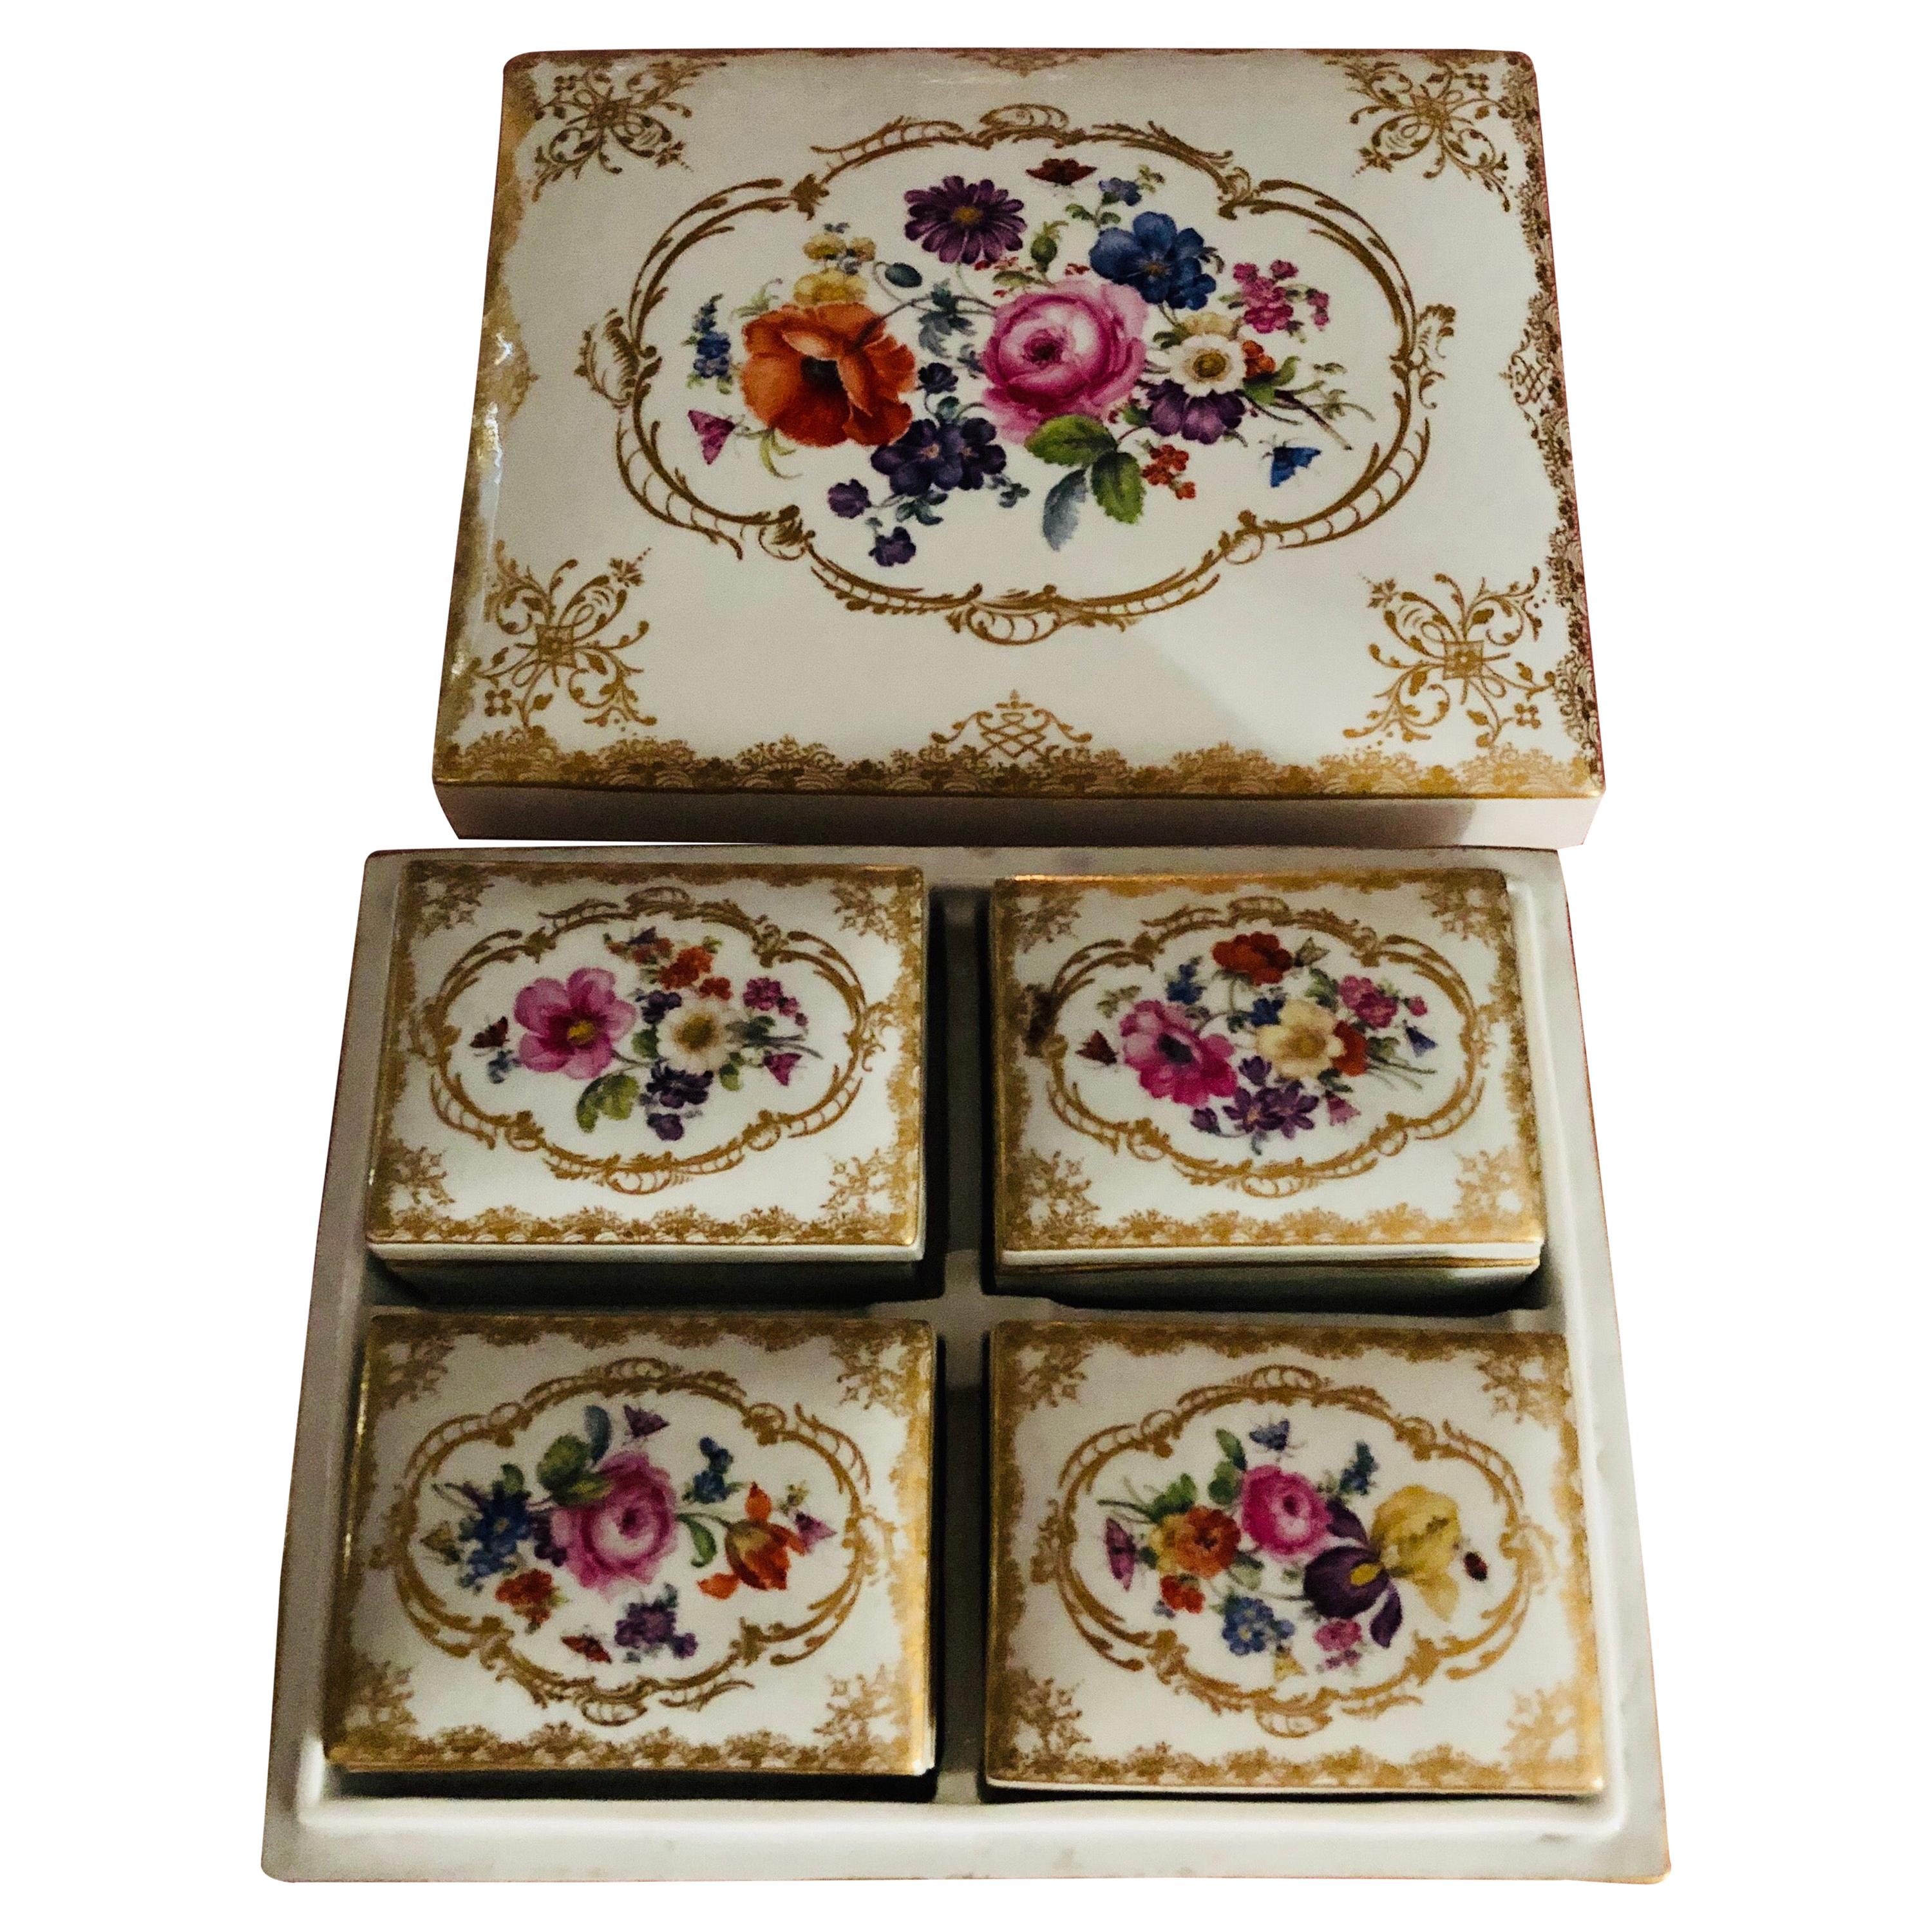 Meissen late 19th century floral painted box which has four smaller boxes inside it. If you look through the pictures, you can see closeups of the intricate detail in the different flower paintings that are painted on each of the boxes. The Meissen